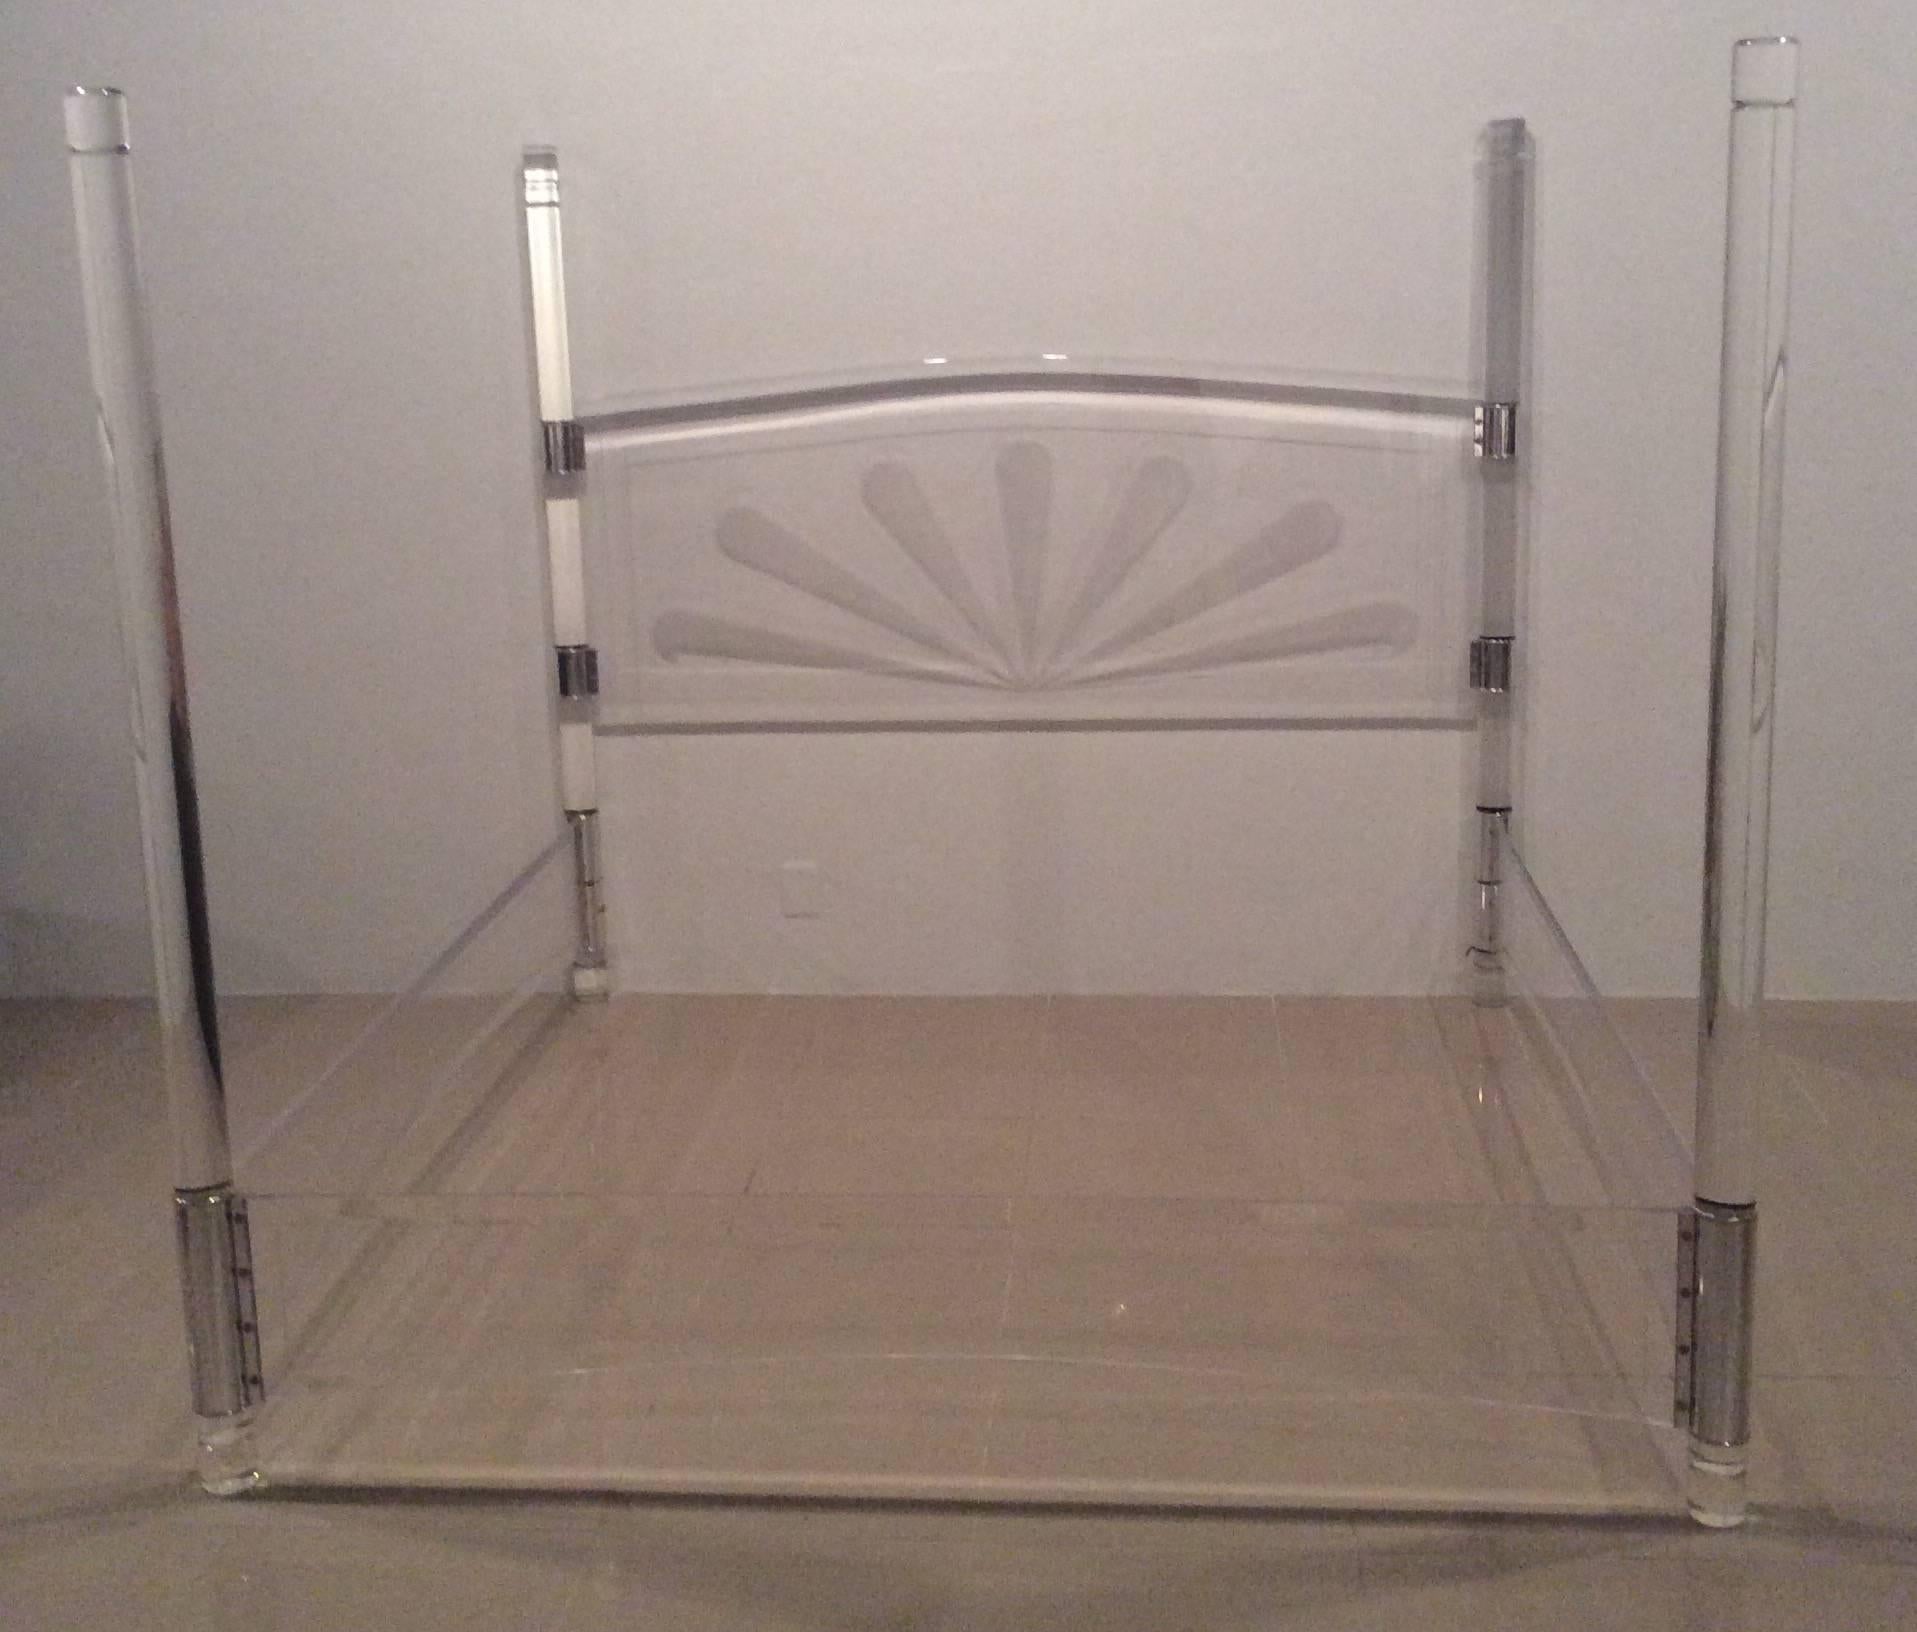 Incredible vintage mid century modern, Lucite and chrome bed in the style of Charles Hollis Jones, four post canopy style, king-size, includes headboard, side rails, footboard, posts. The Lucite is incredibly thick! This is in excellent shape and